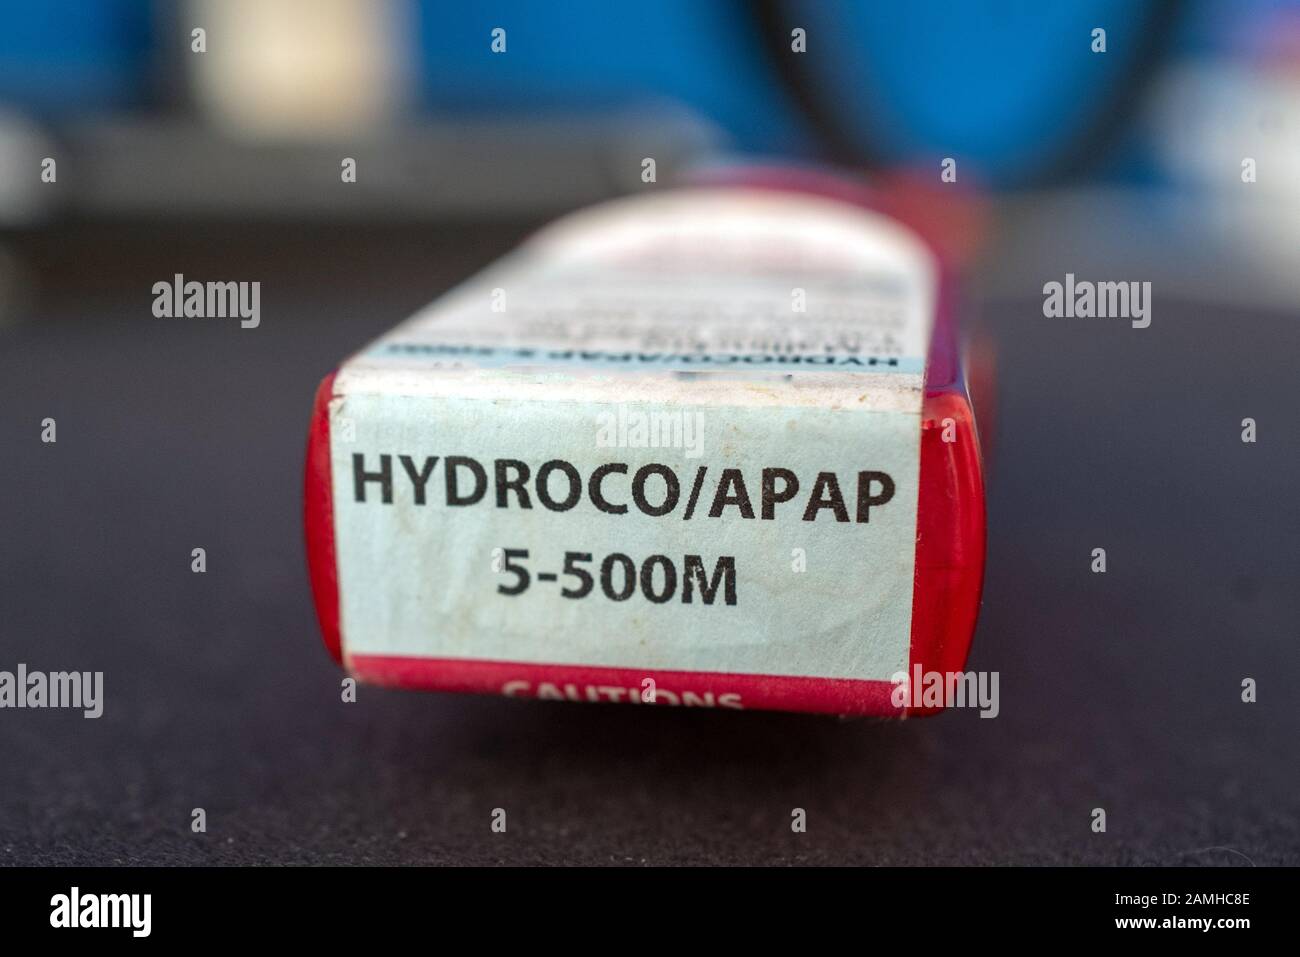 Illustrative image, close-up of bottle of the combination narcotic opioid pain medication hydrocodone 5-acetaminophen 500, marketed under the trade names Vicodin or Lortab, San Ramon, California, December 10, 2019. Many regulators and lawmakers are focusing on the opioid crisis in the United States, which has led to addiction and illegal drug use. Editing Note: Image edited to remove patient identifying information. () Stock Photo